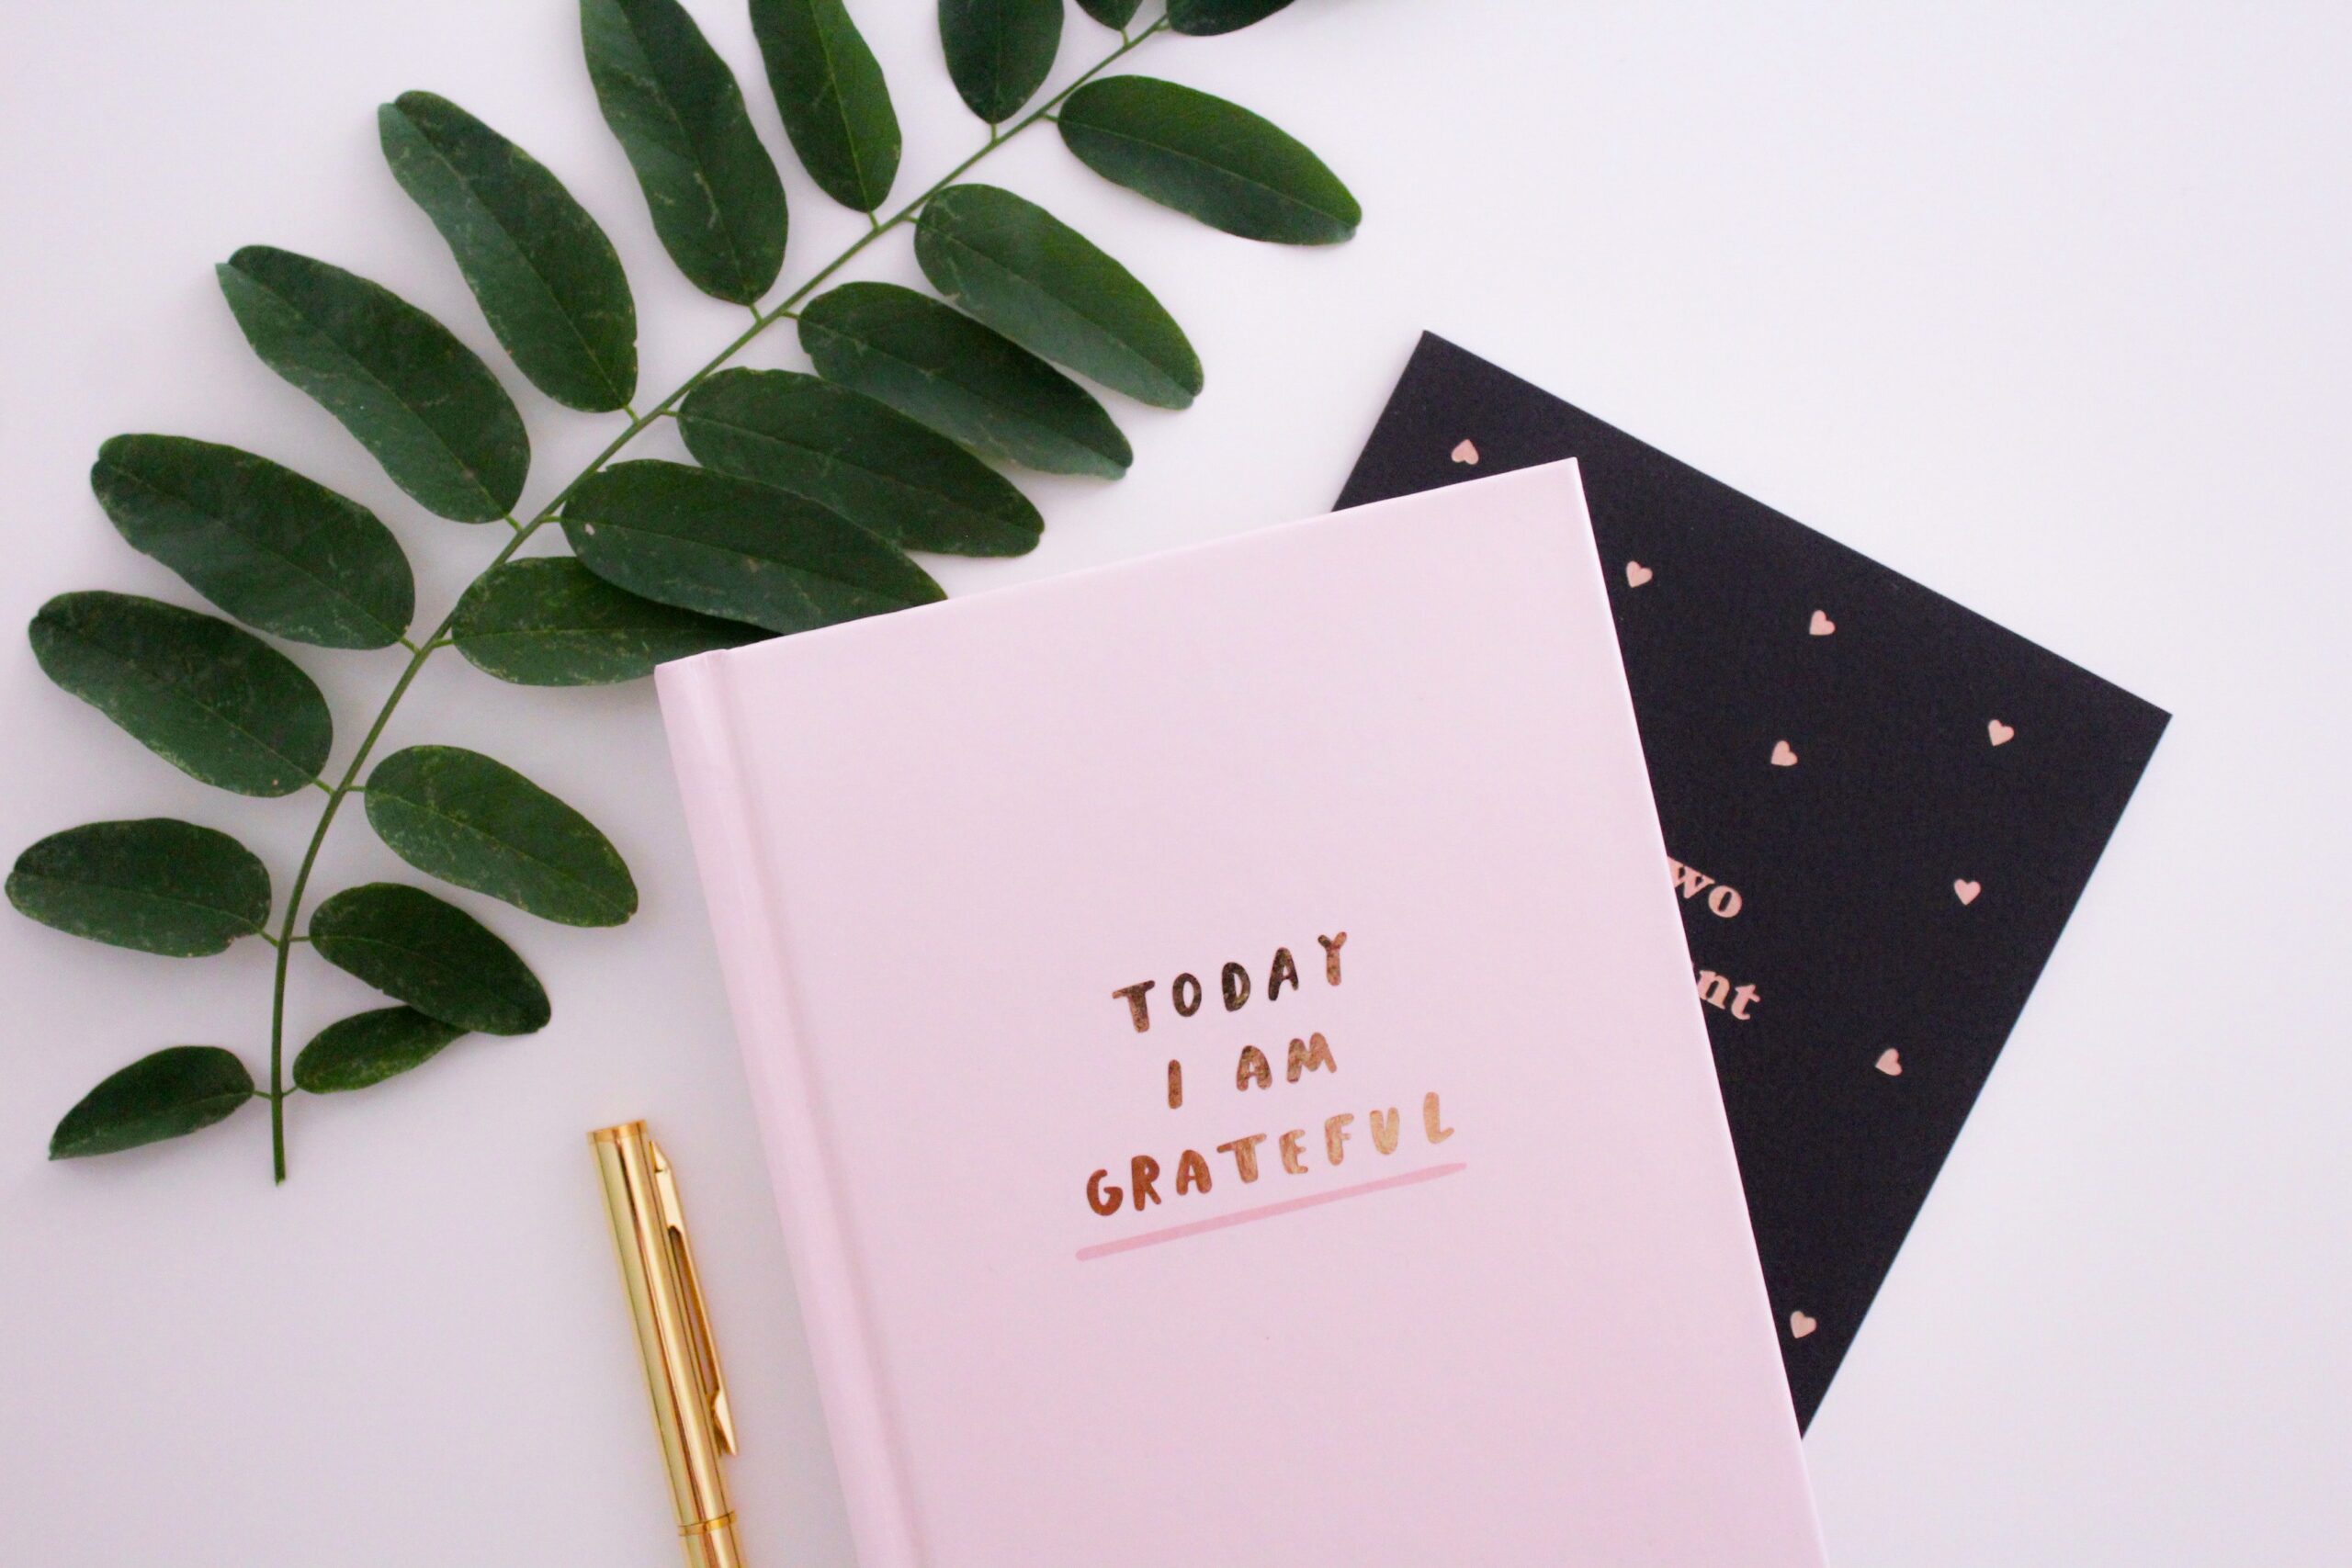 A gratitude journal helps you remember what matters most.